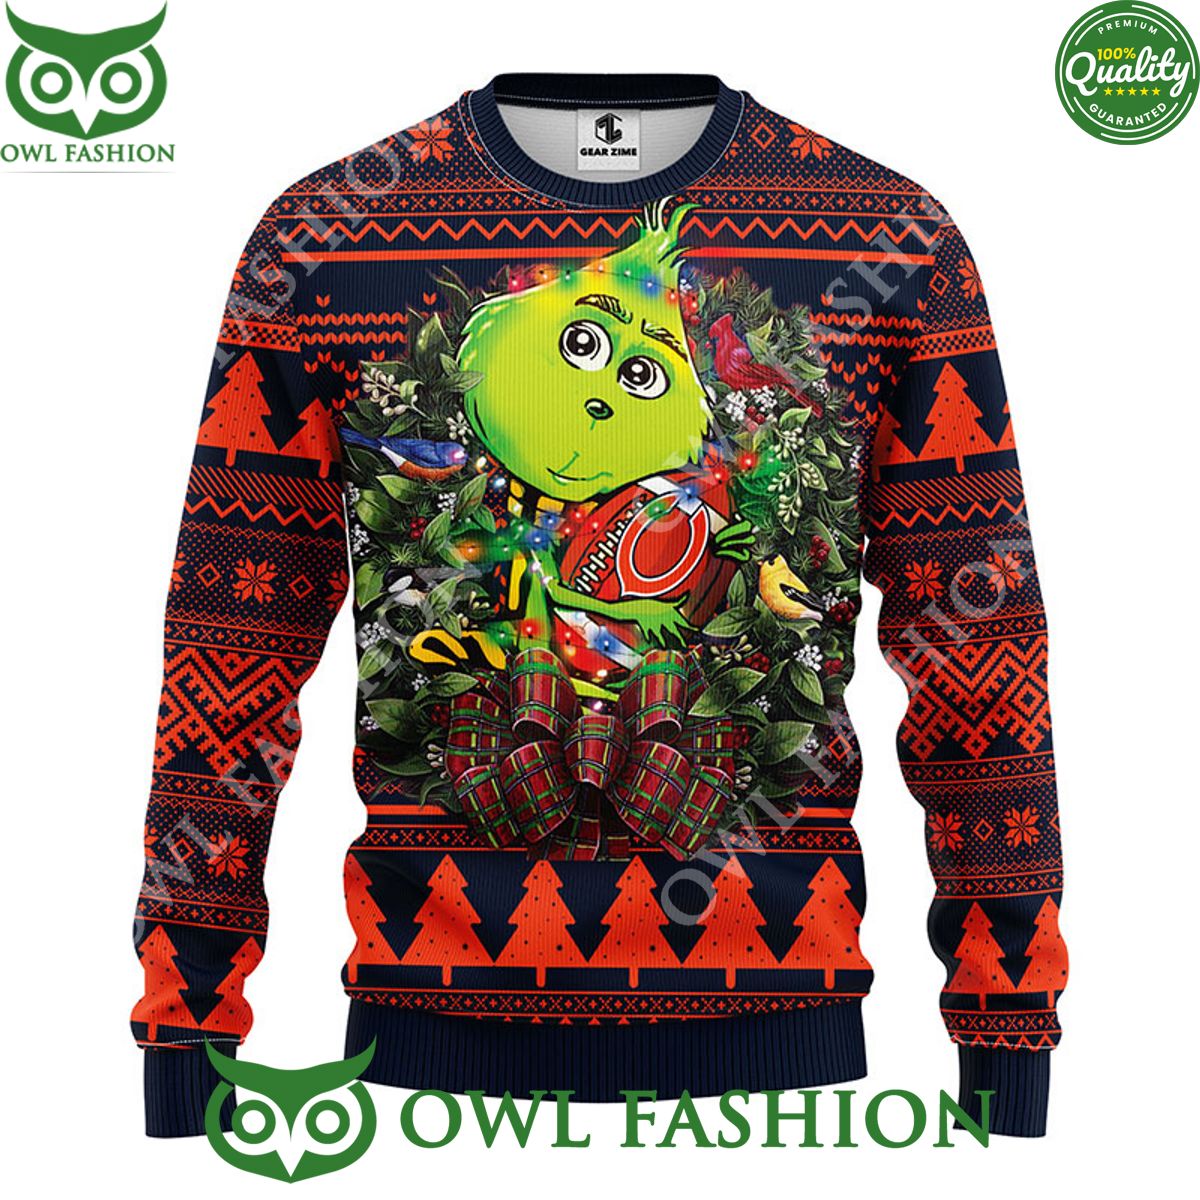 NEW Low Price Louis Vuitton Reindeer Christmas Version Ugly Sweater